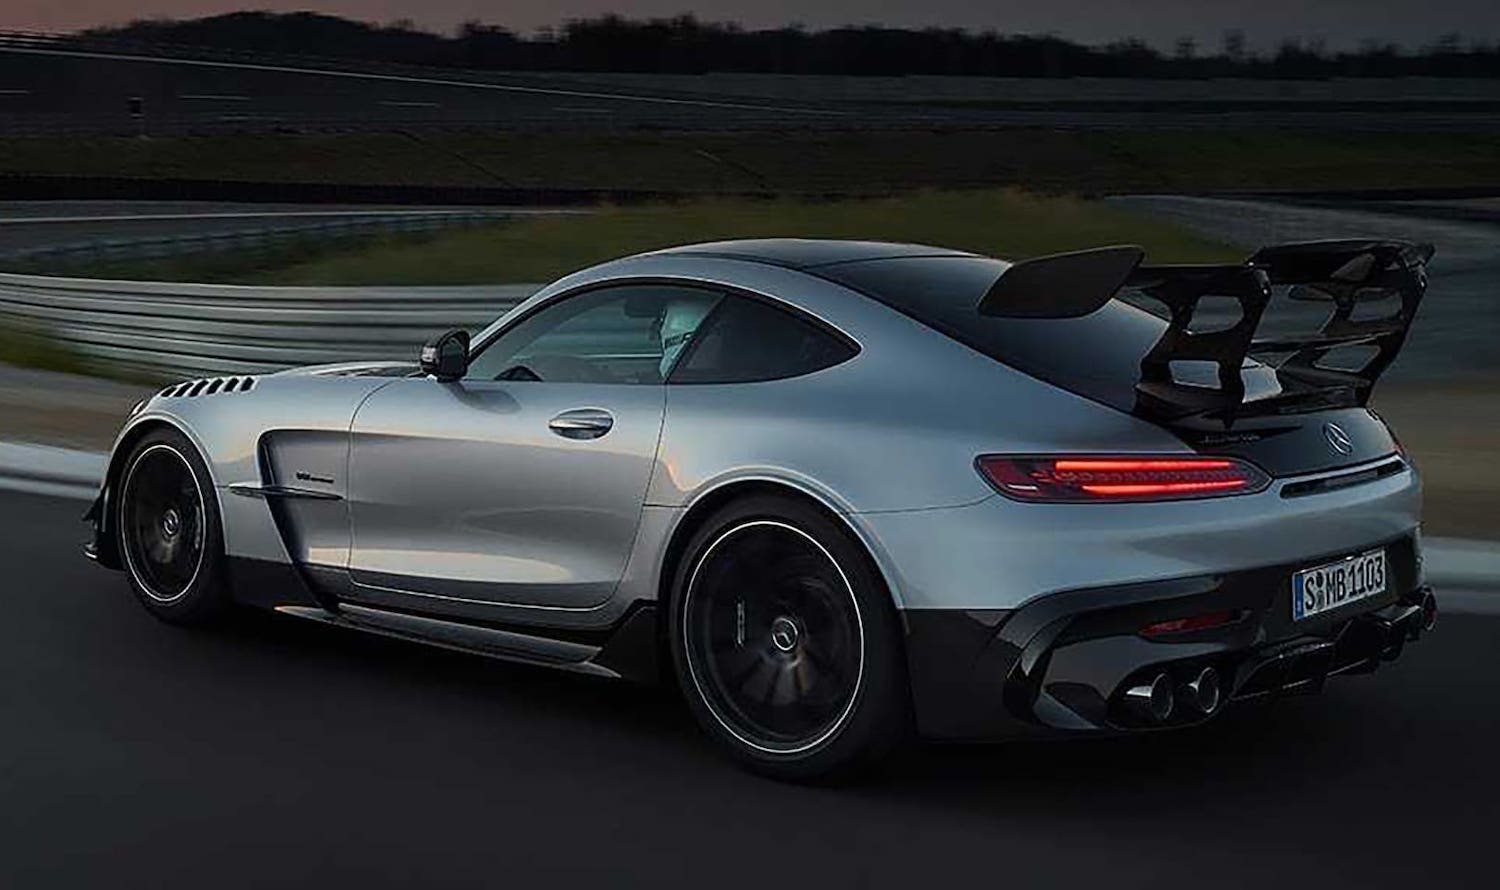 Video Check Out The 2021 Mercedes Amg Gt Black Series Mercedes Benz Supercars Net